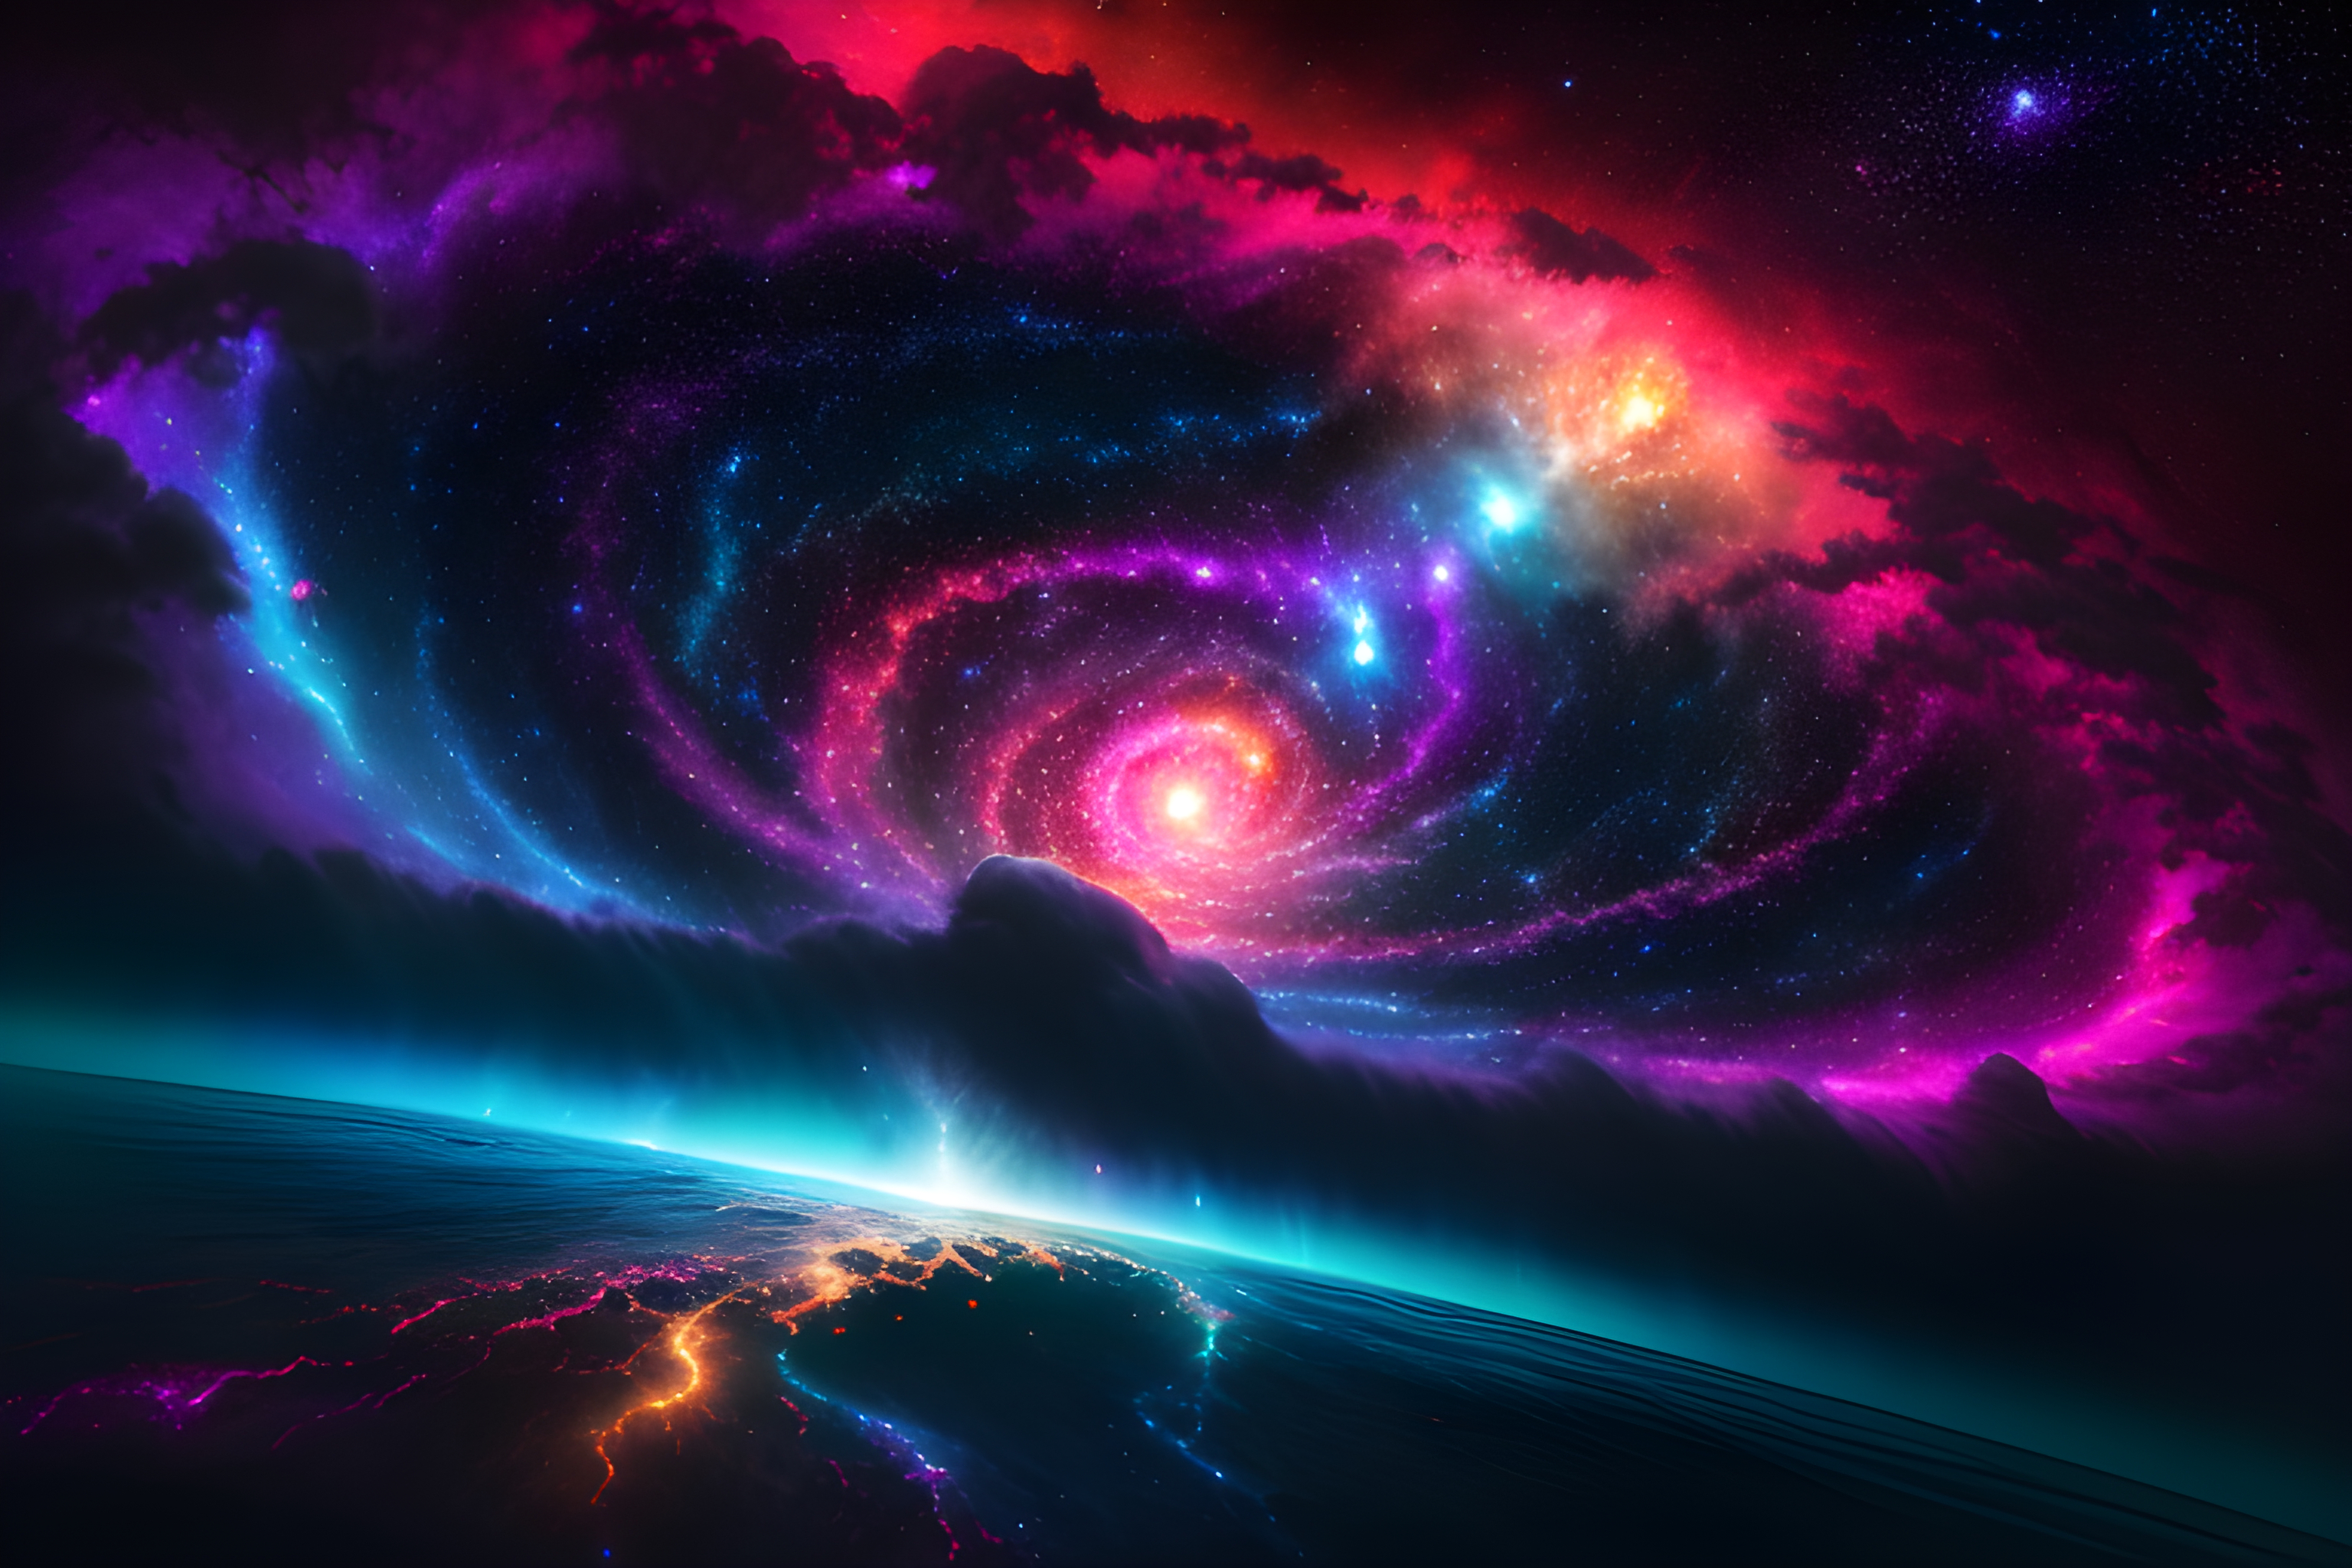 SHARE ] By @minit051 | Galaxy wallpaper, Wallpaper space, Galaxies